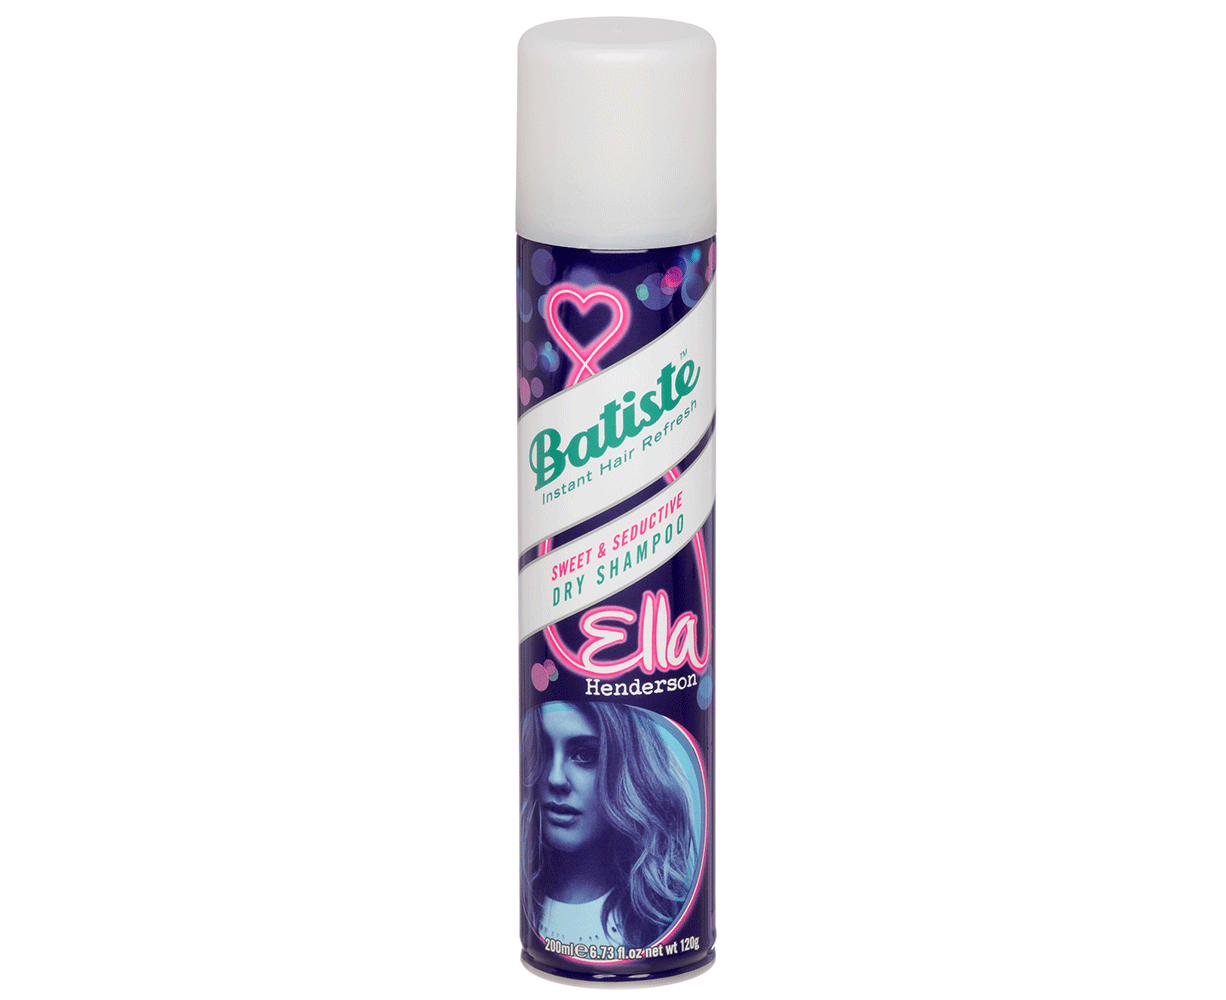 Batiste Dry Shampoo 3x 200ml Hair Care Styling/Boost/Refresh Sweet and Seductive